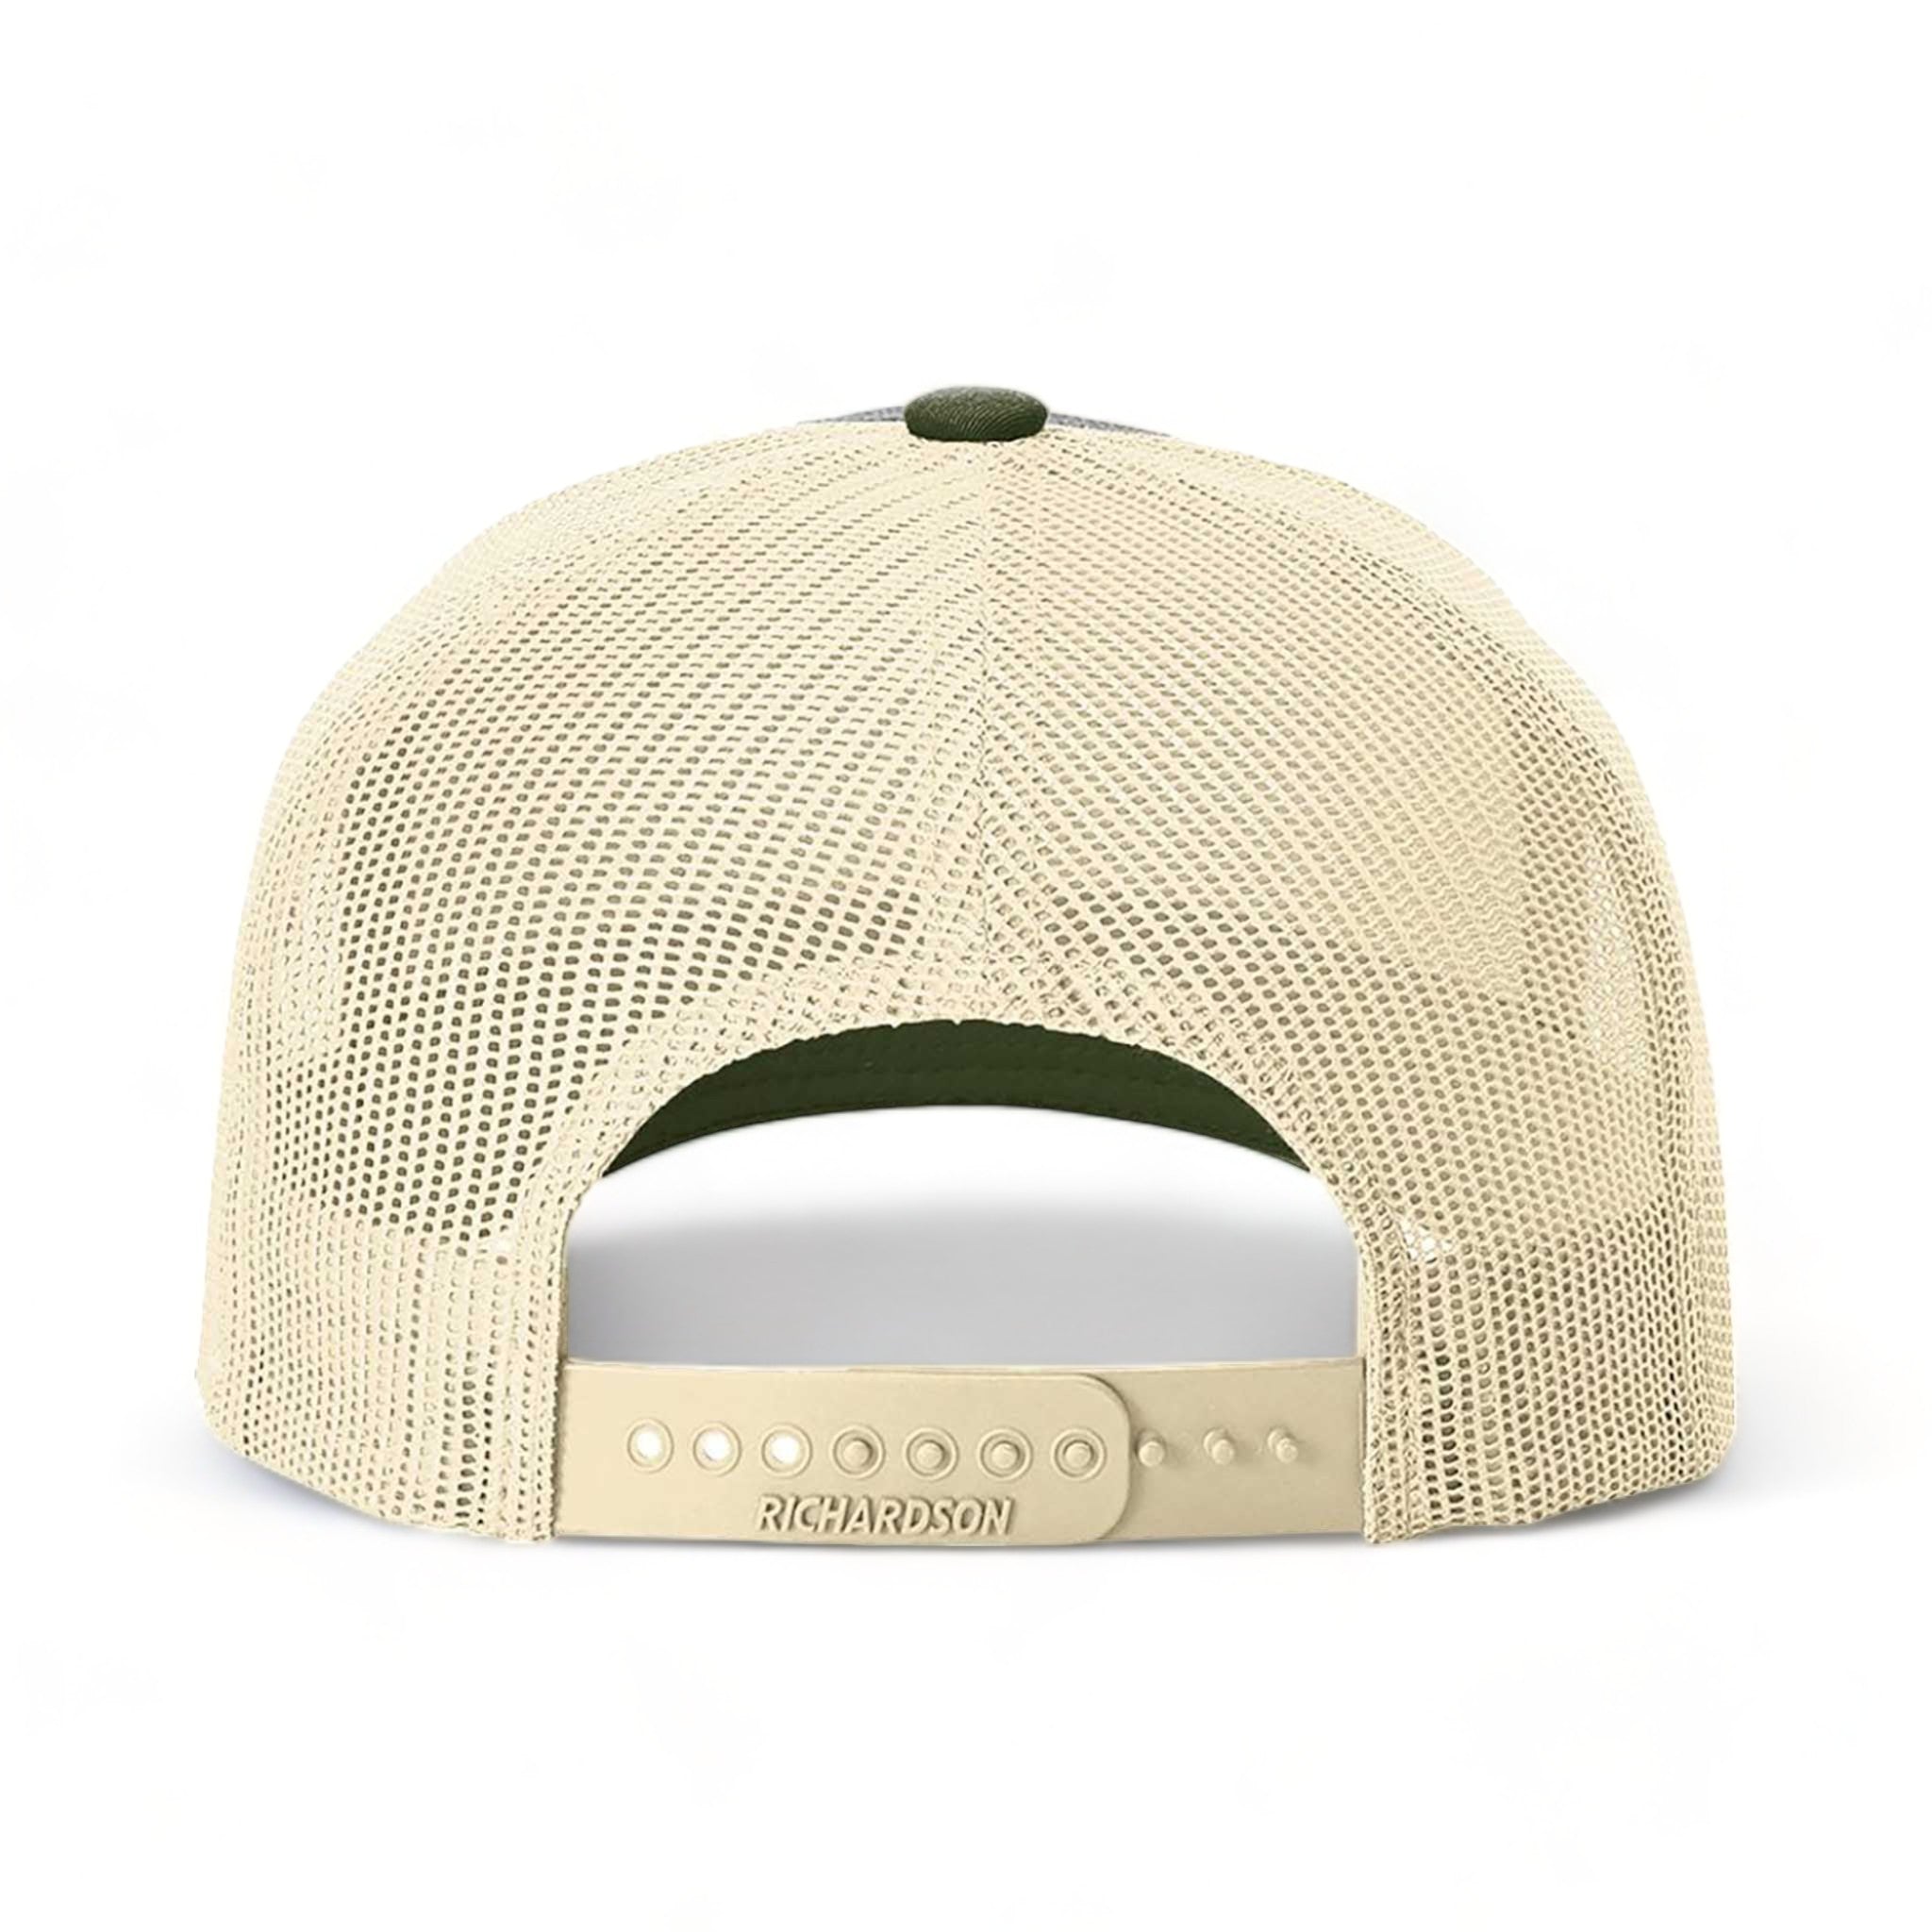 Back view of Richardson 112FP custom hat in heather grey, birch and army olive